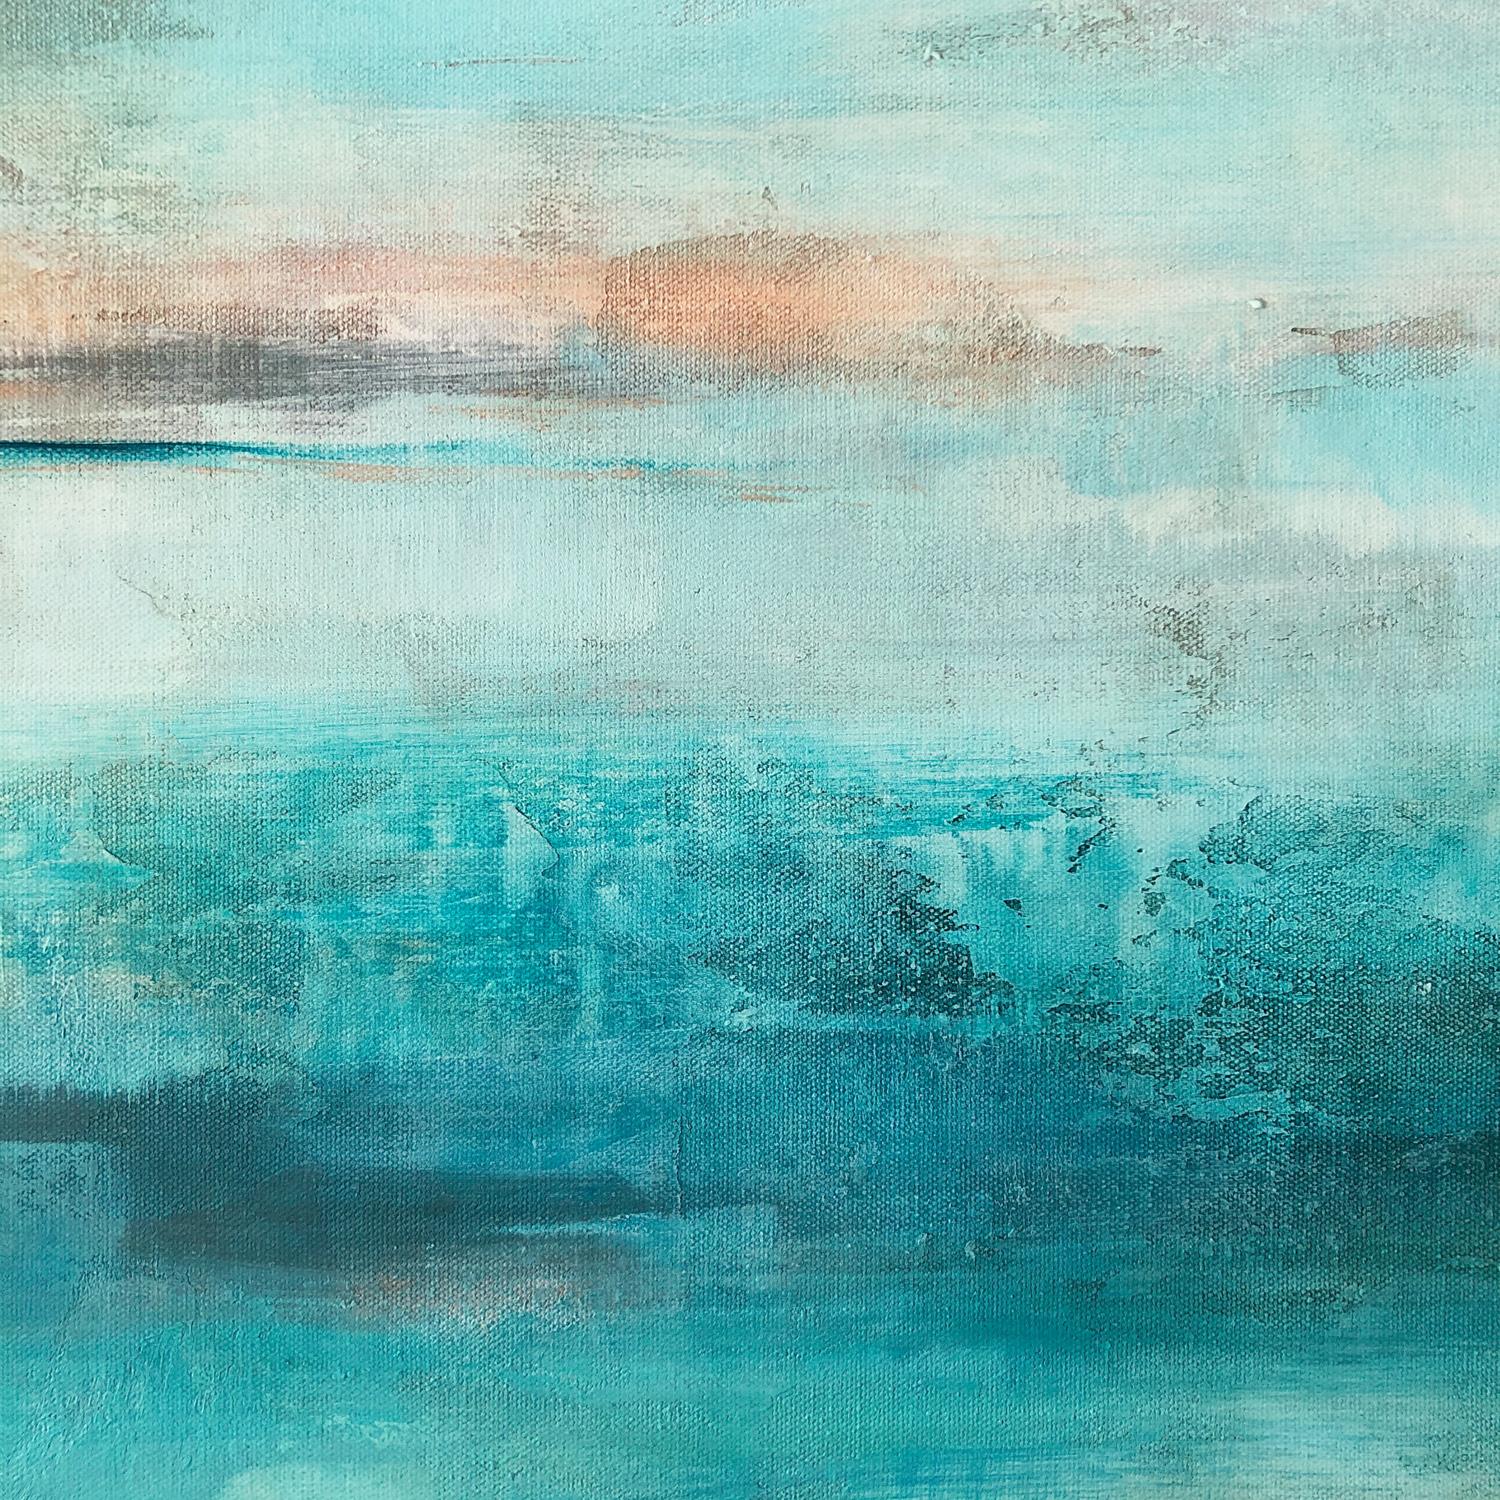 <p>Artist Comments<br />A calm, abstract seascape looking out over an expanse of water at sunrise. Atmospheric turquoise blues fill the scene, with the first band of peach and red light on the horizon. 